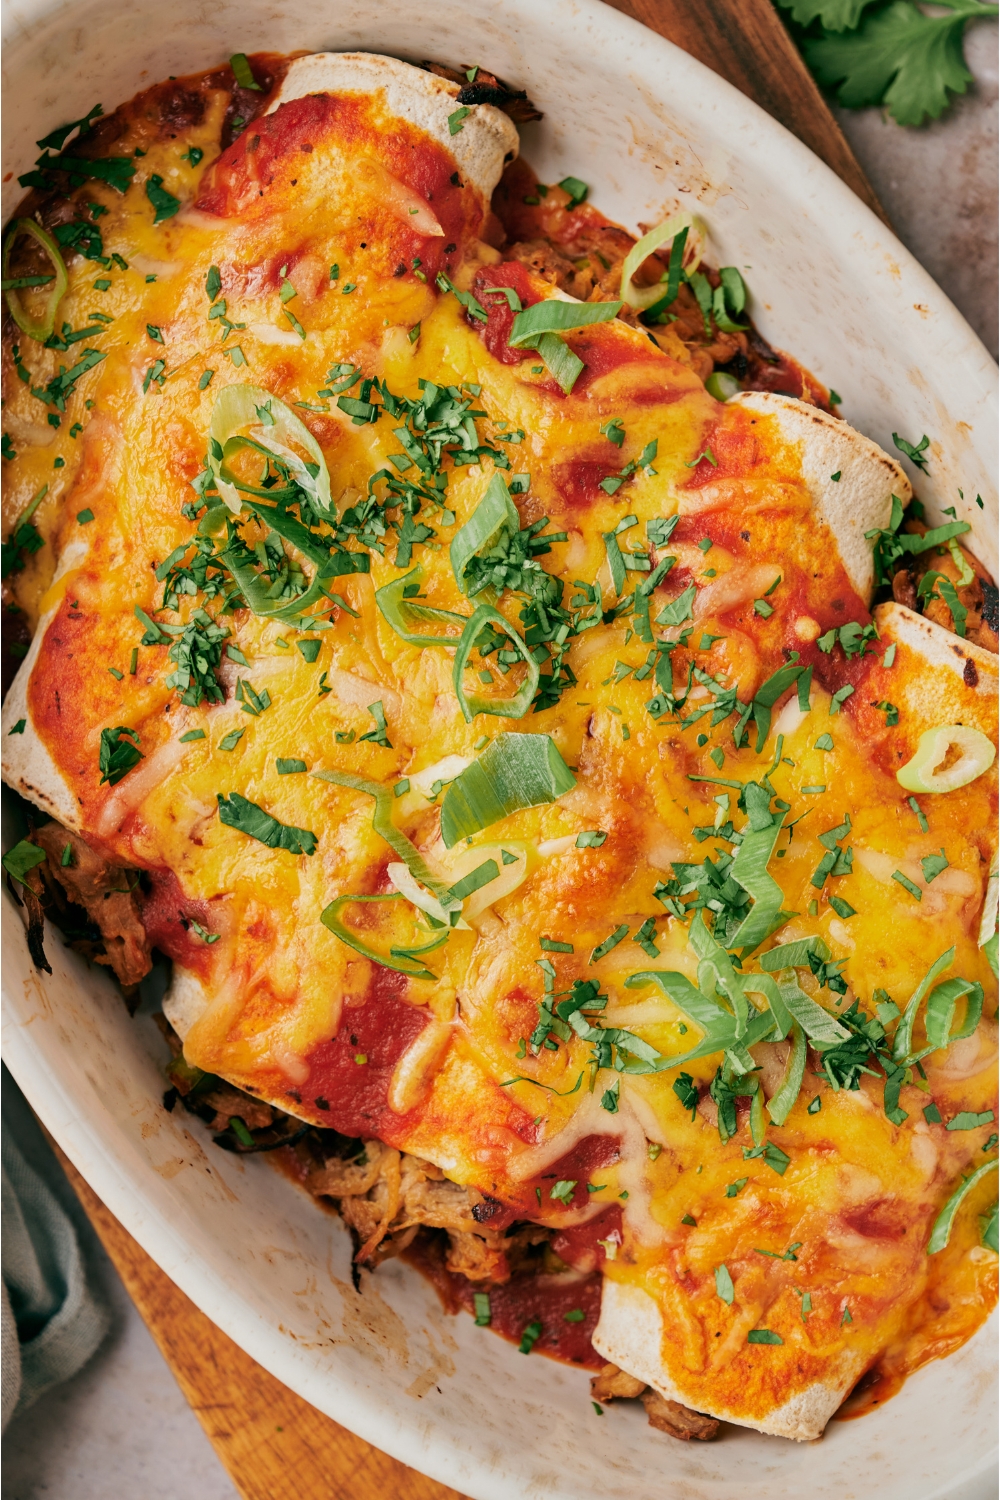 A baking dish atop a wood board filled with freshly baked pork enchiladas covered in melted cheese and fresh herbs.